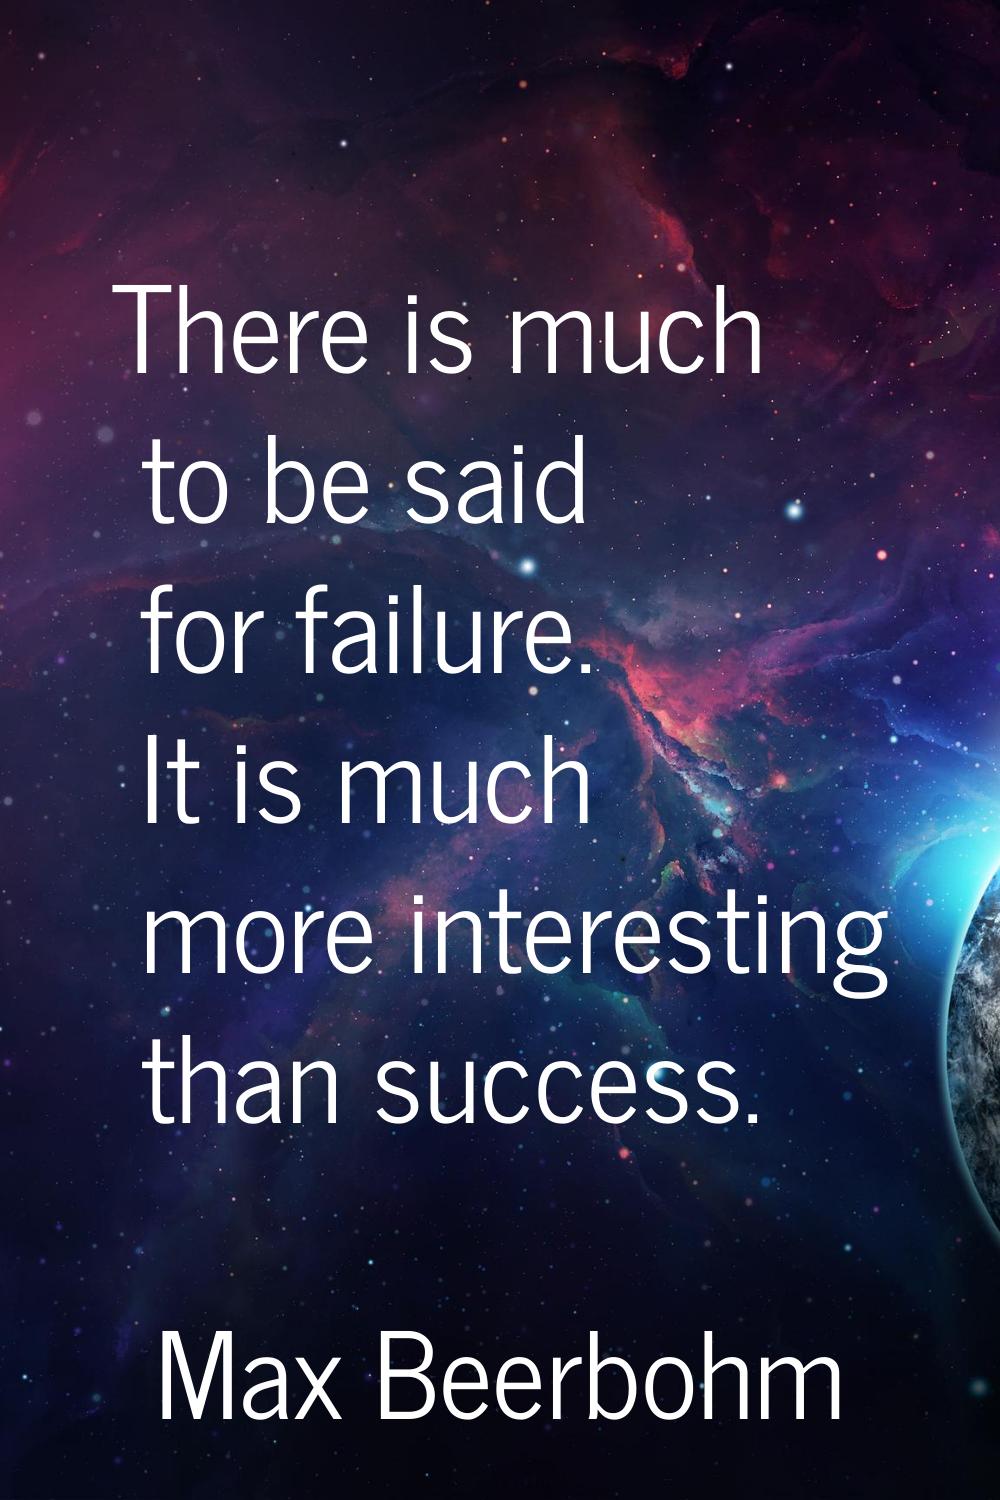 There is much to be said for failure. It is much more interesting than success.